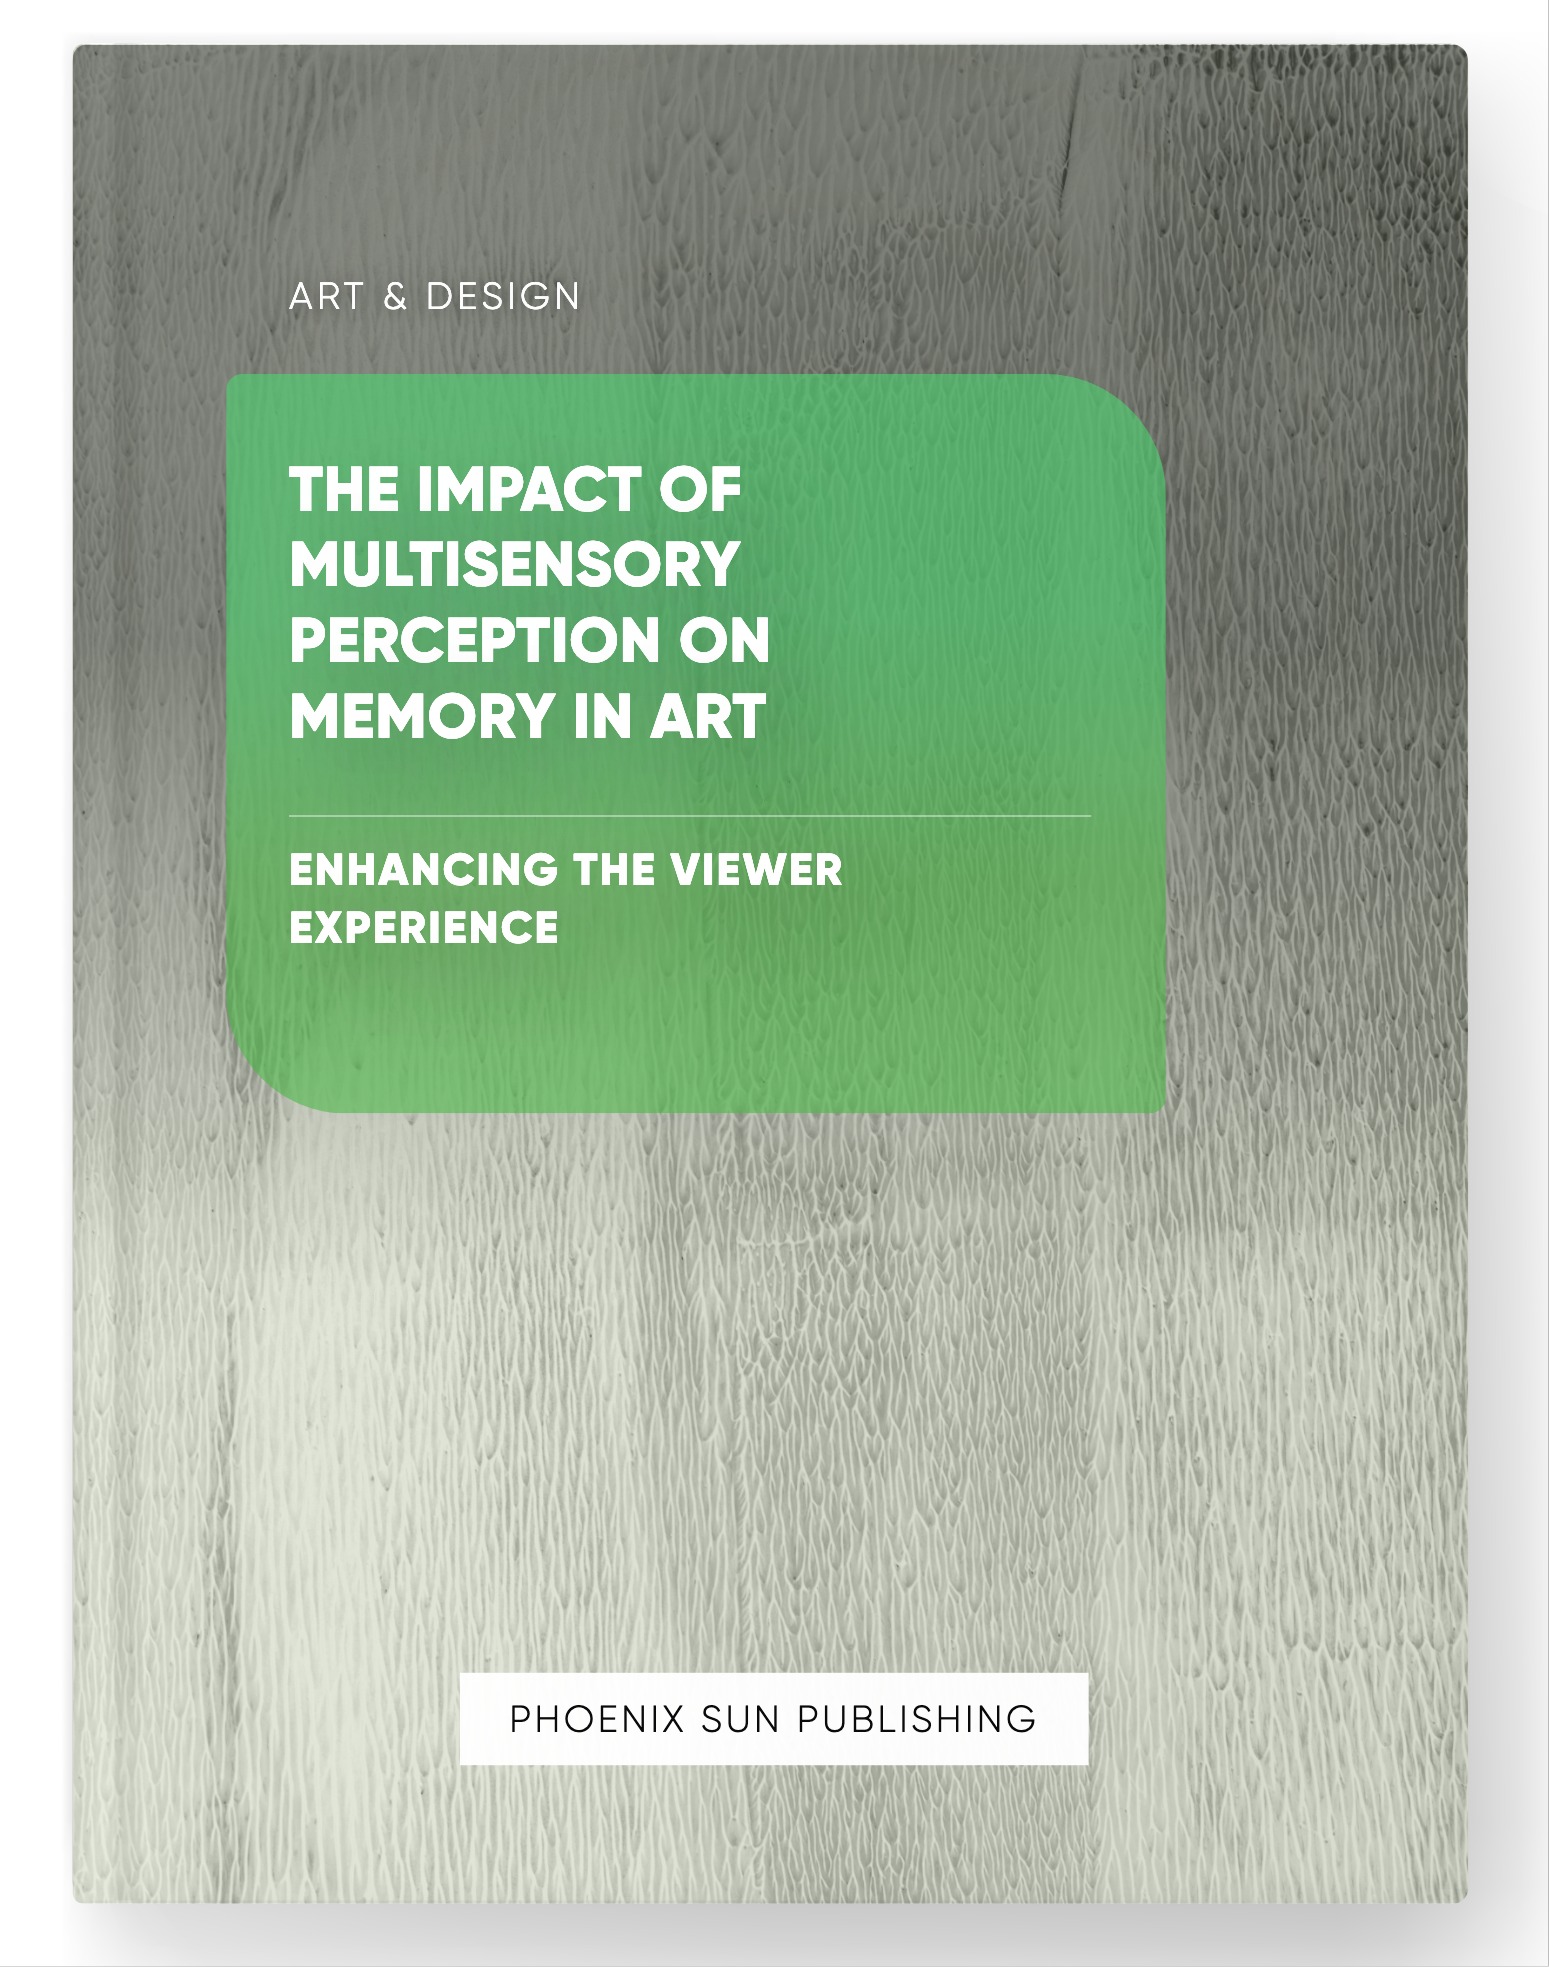 The Impact of Multisensory Perception on Memory in Art – Enhancing the Viewer Experience